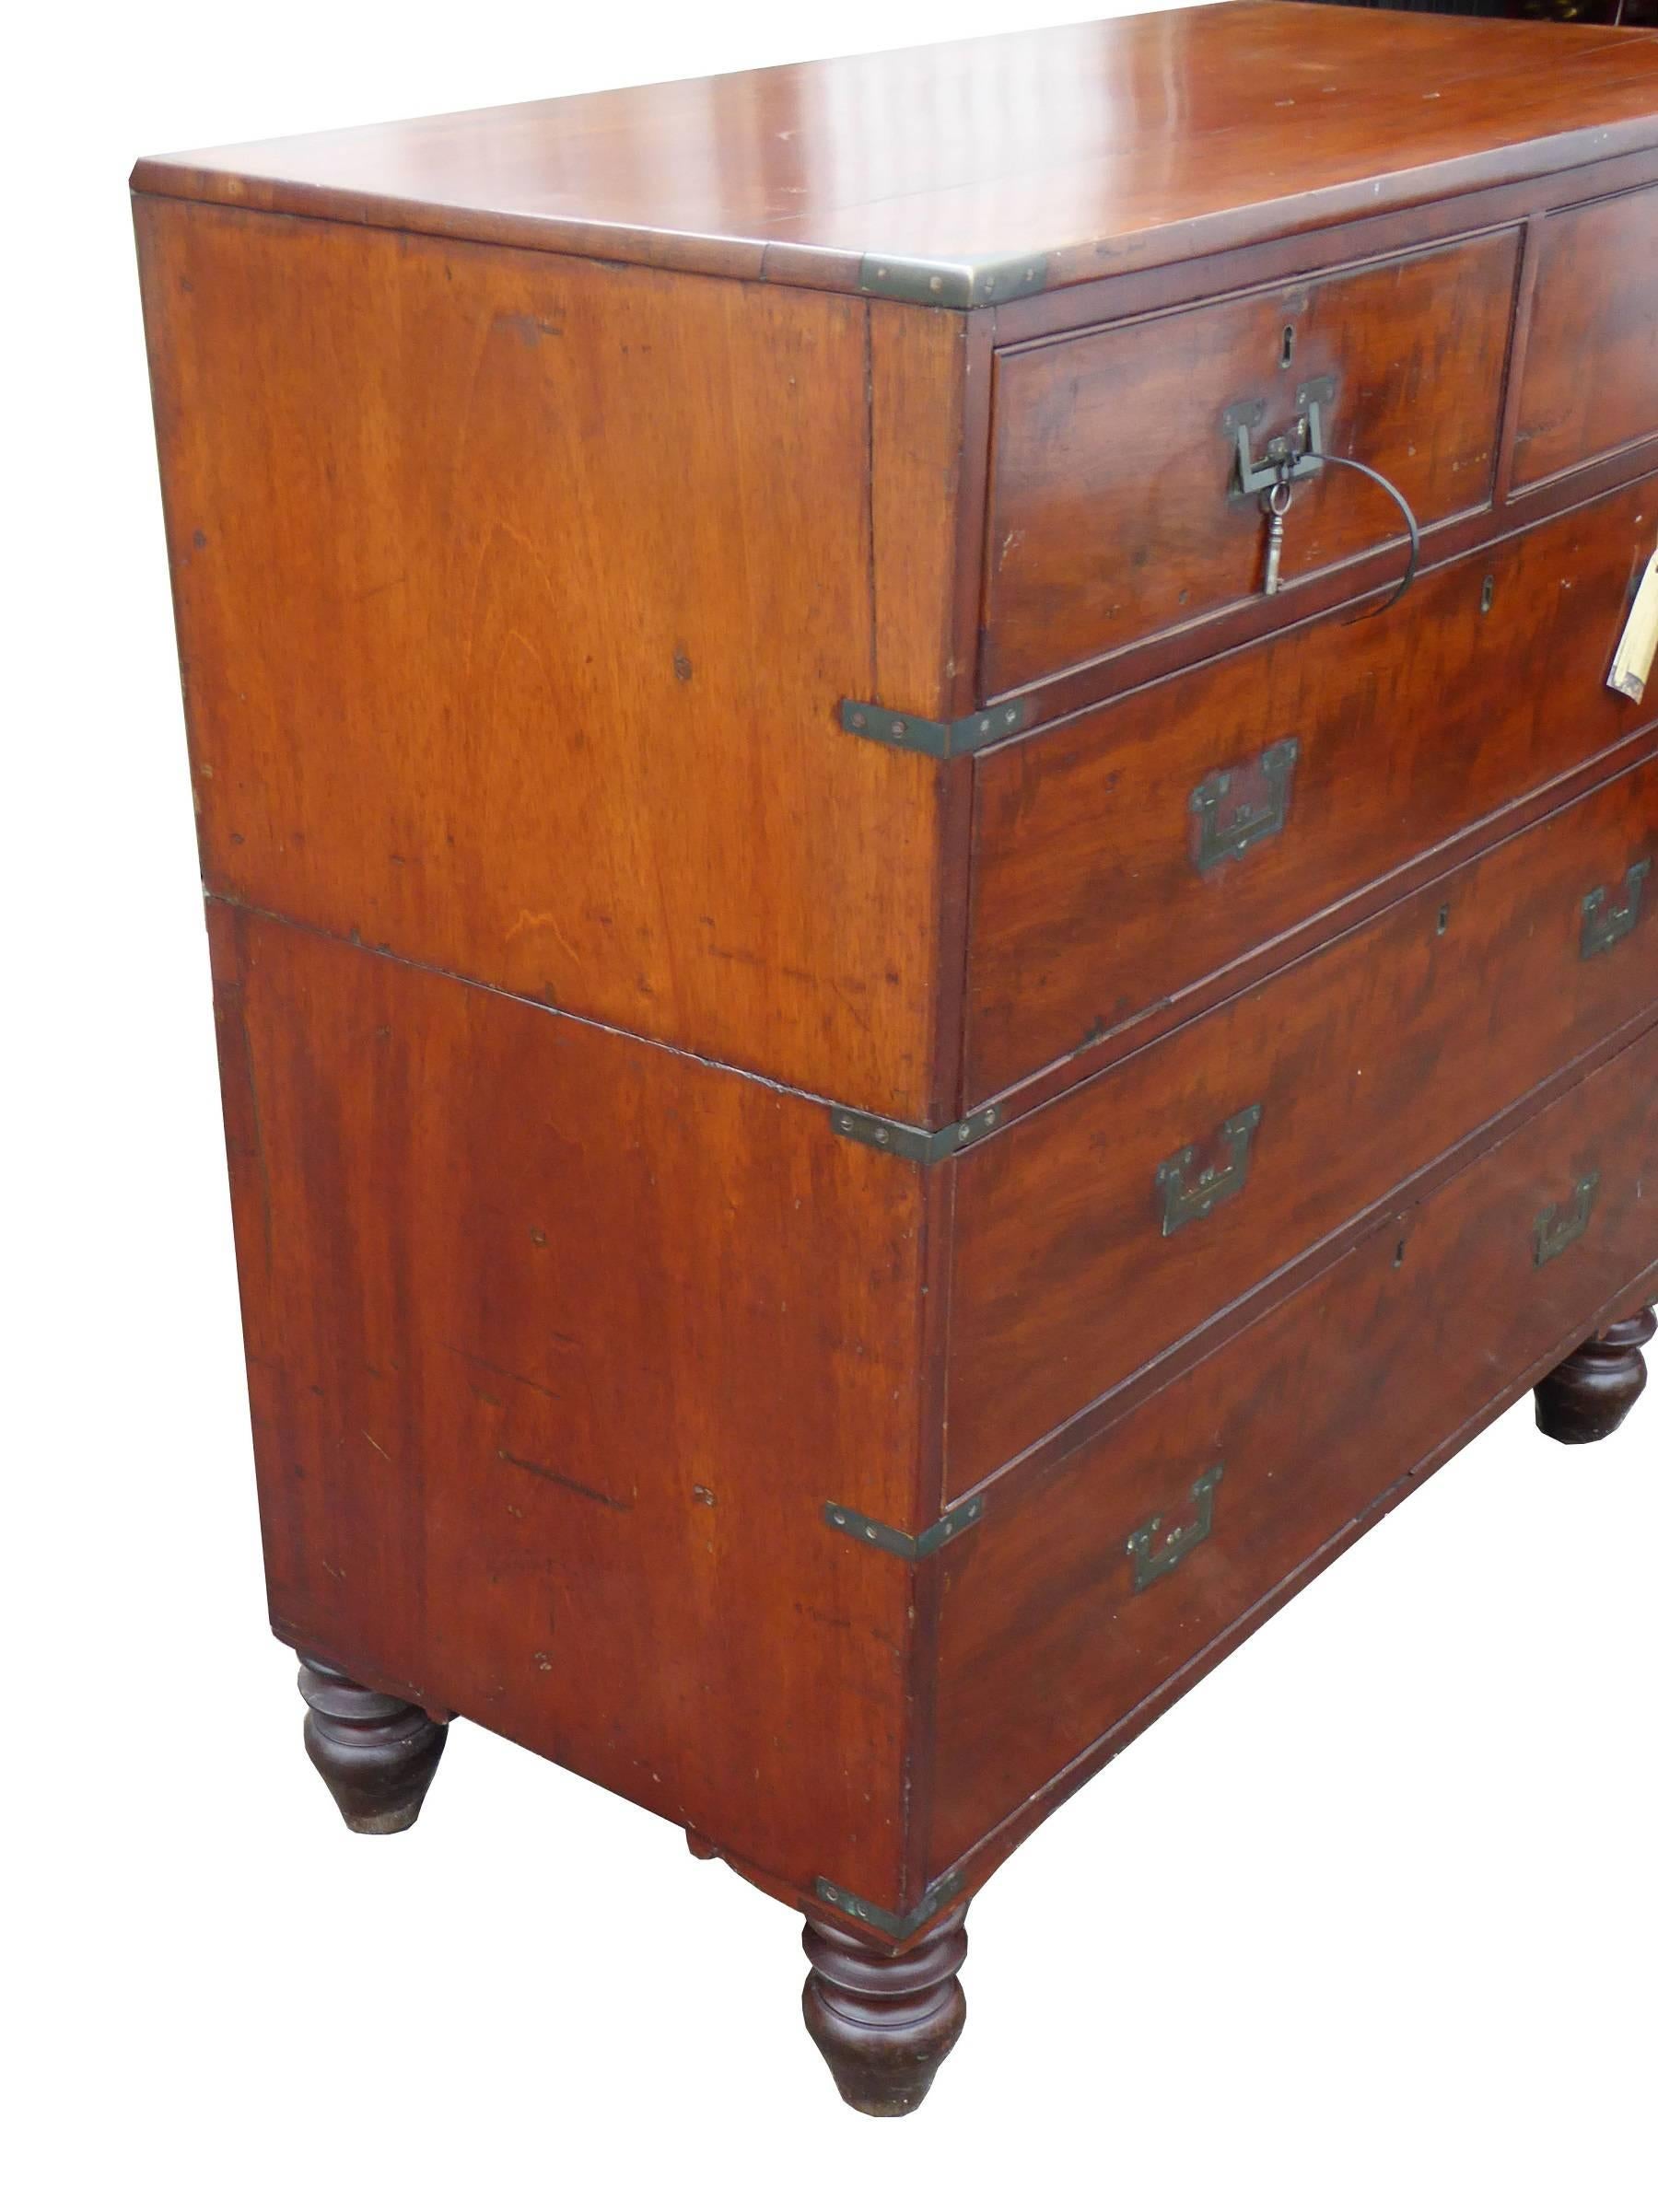 For sale is a good quality George III mahogany campaign chest. The chest splits into two halves and has its original brass handles, locks etc. complete with original key. The piece stands on nicely turned feet and is in good condition with slight